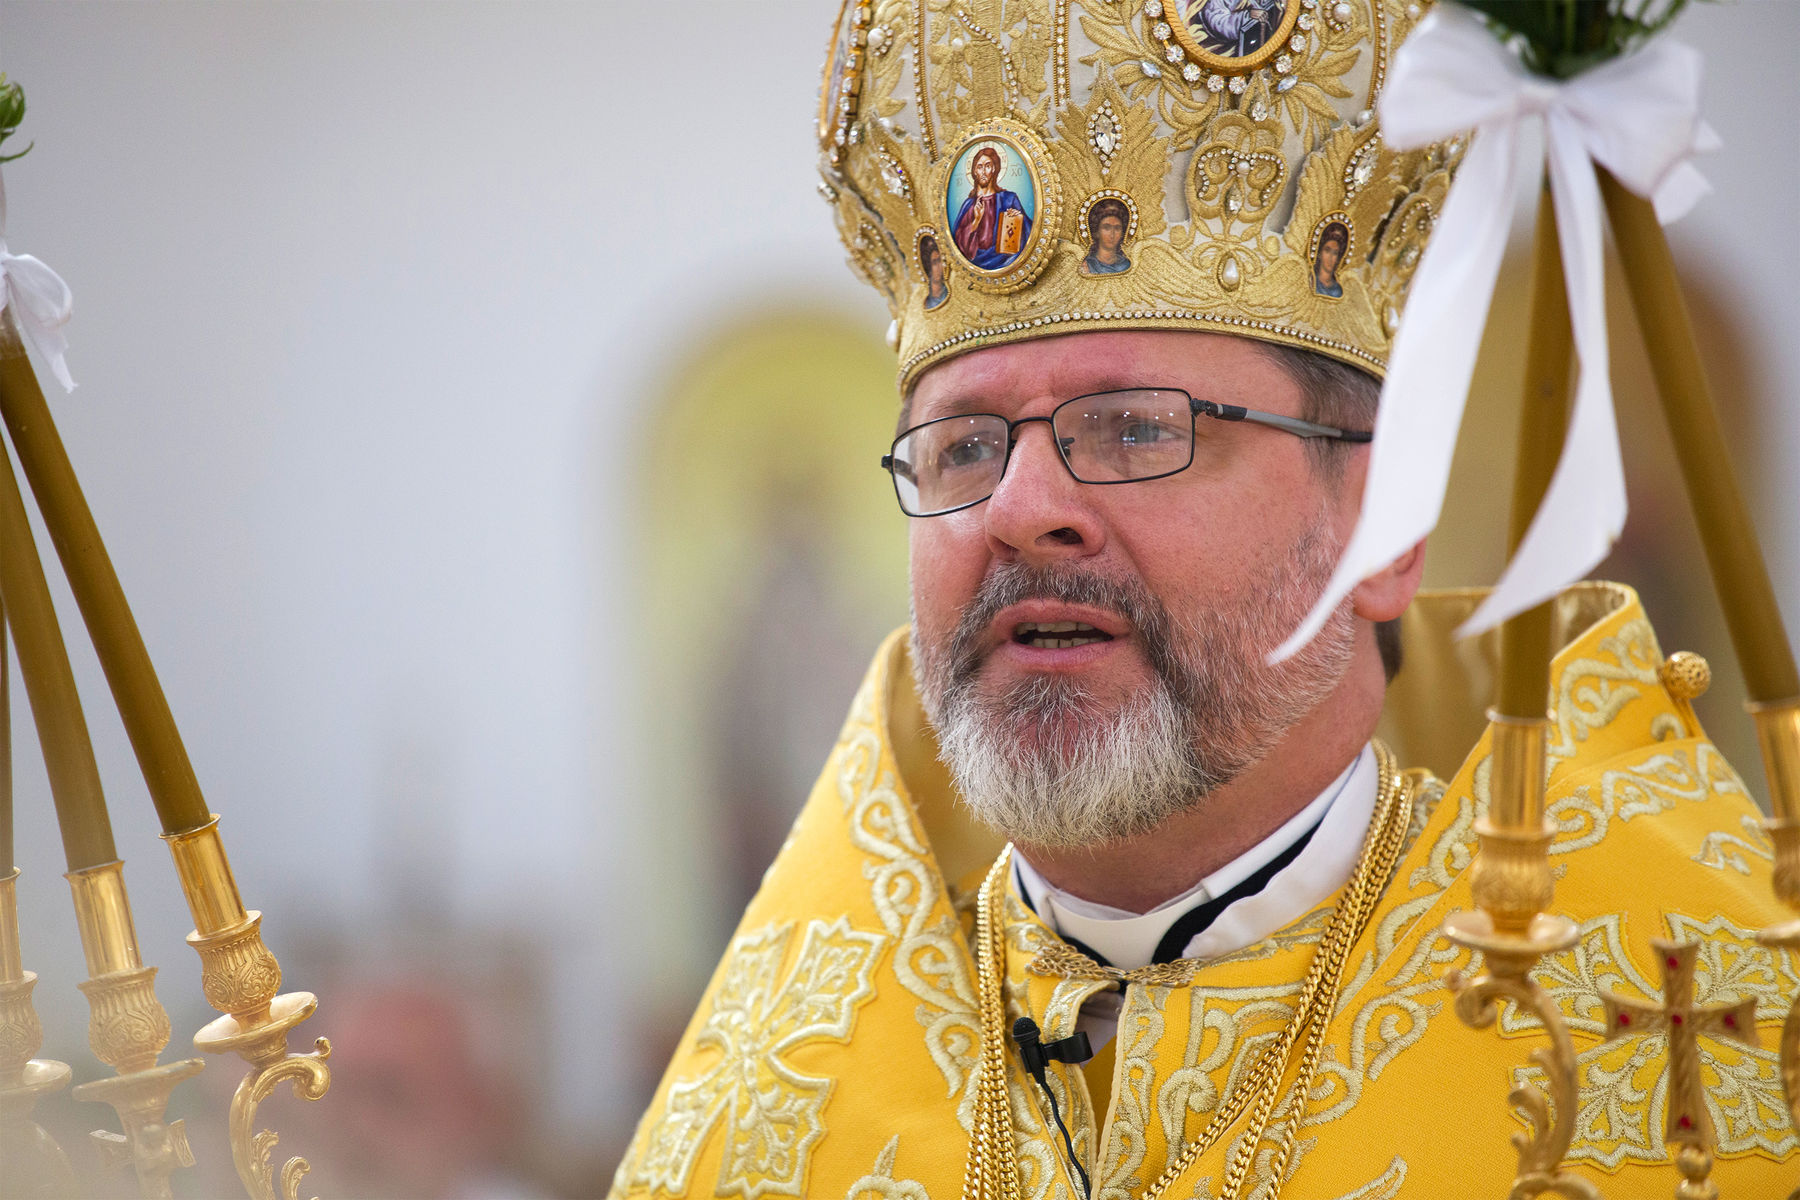 “The Lord God remains faithful even when we betray”: His Beatitude Sviatoslav on the Feast of the Circumcision of Our Lord and Savior Jesus Christ